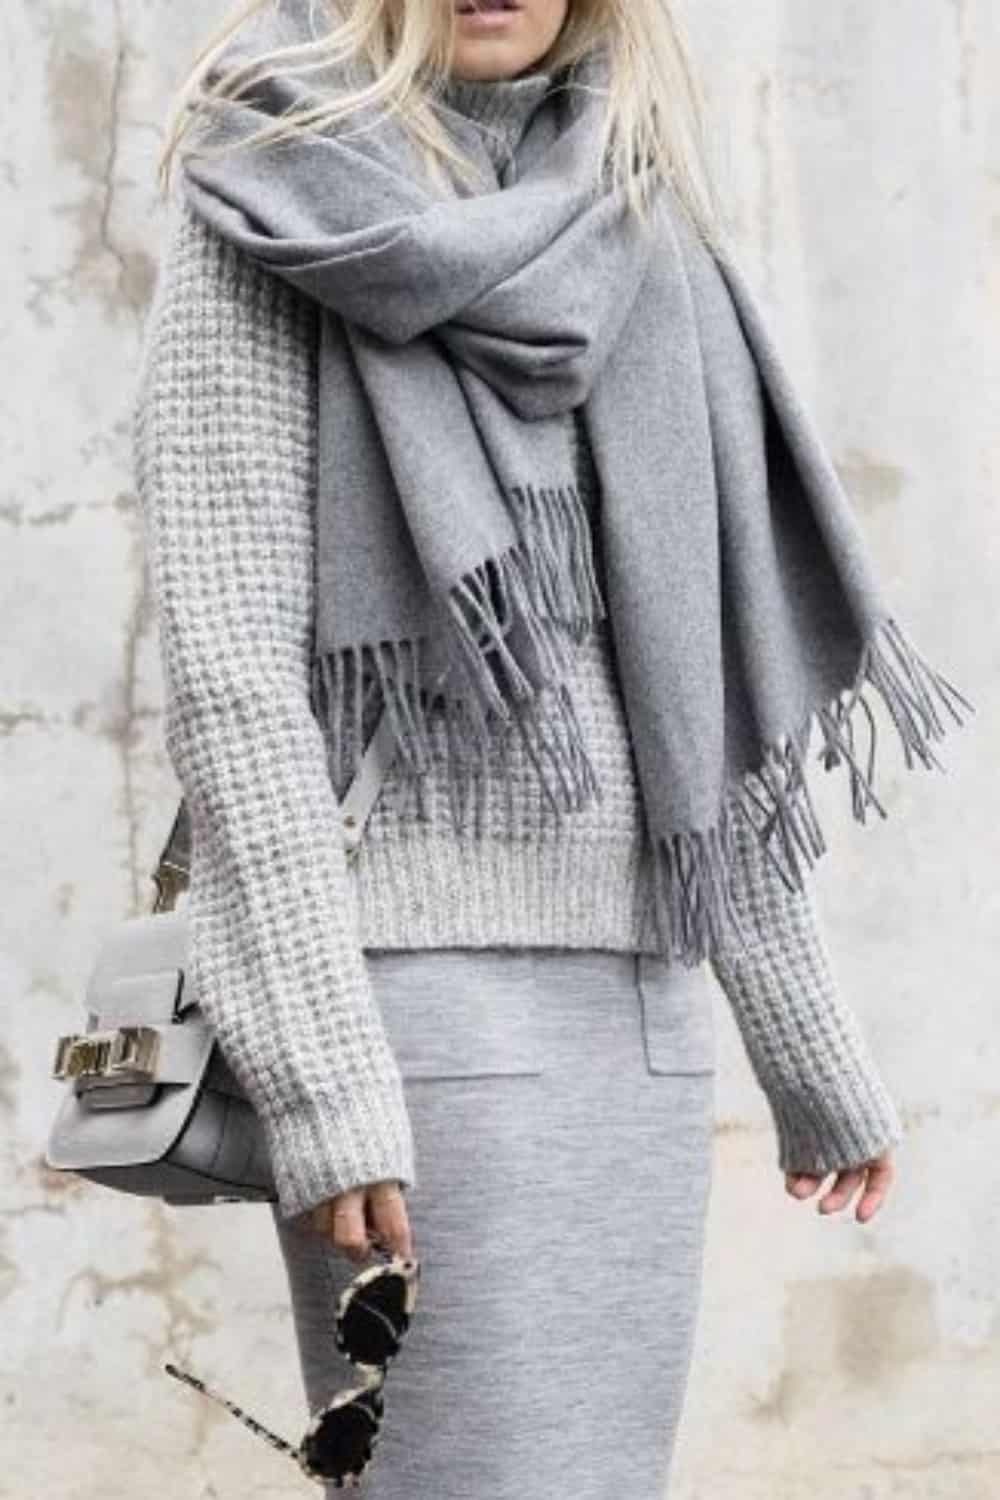 Scarves with Sweater over dress